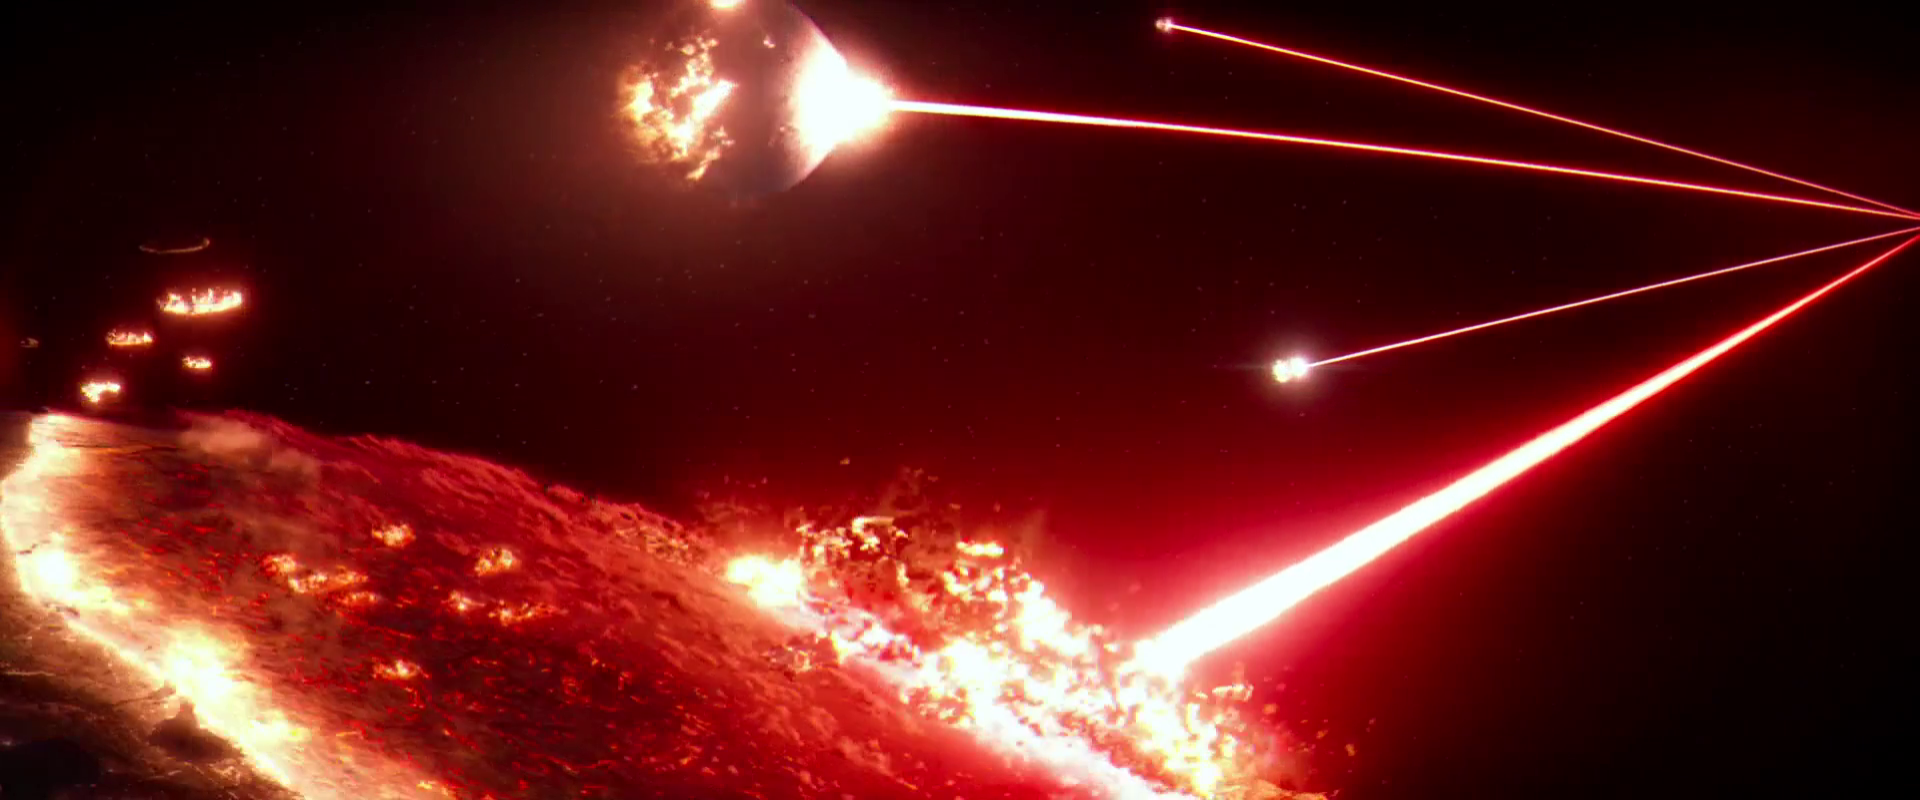 What Planets Were Destroyed in Star Wars: The Force Awakens?